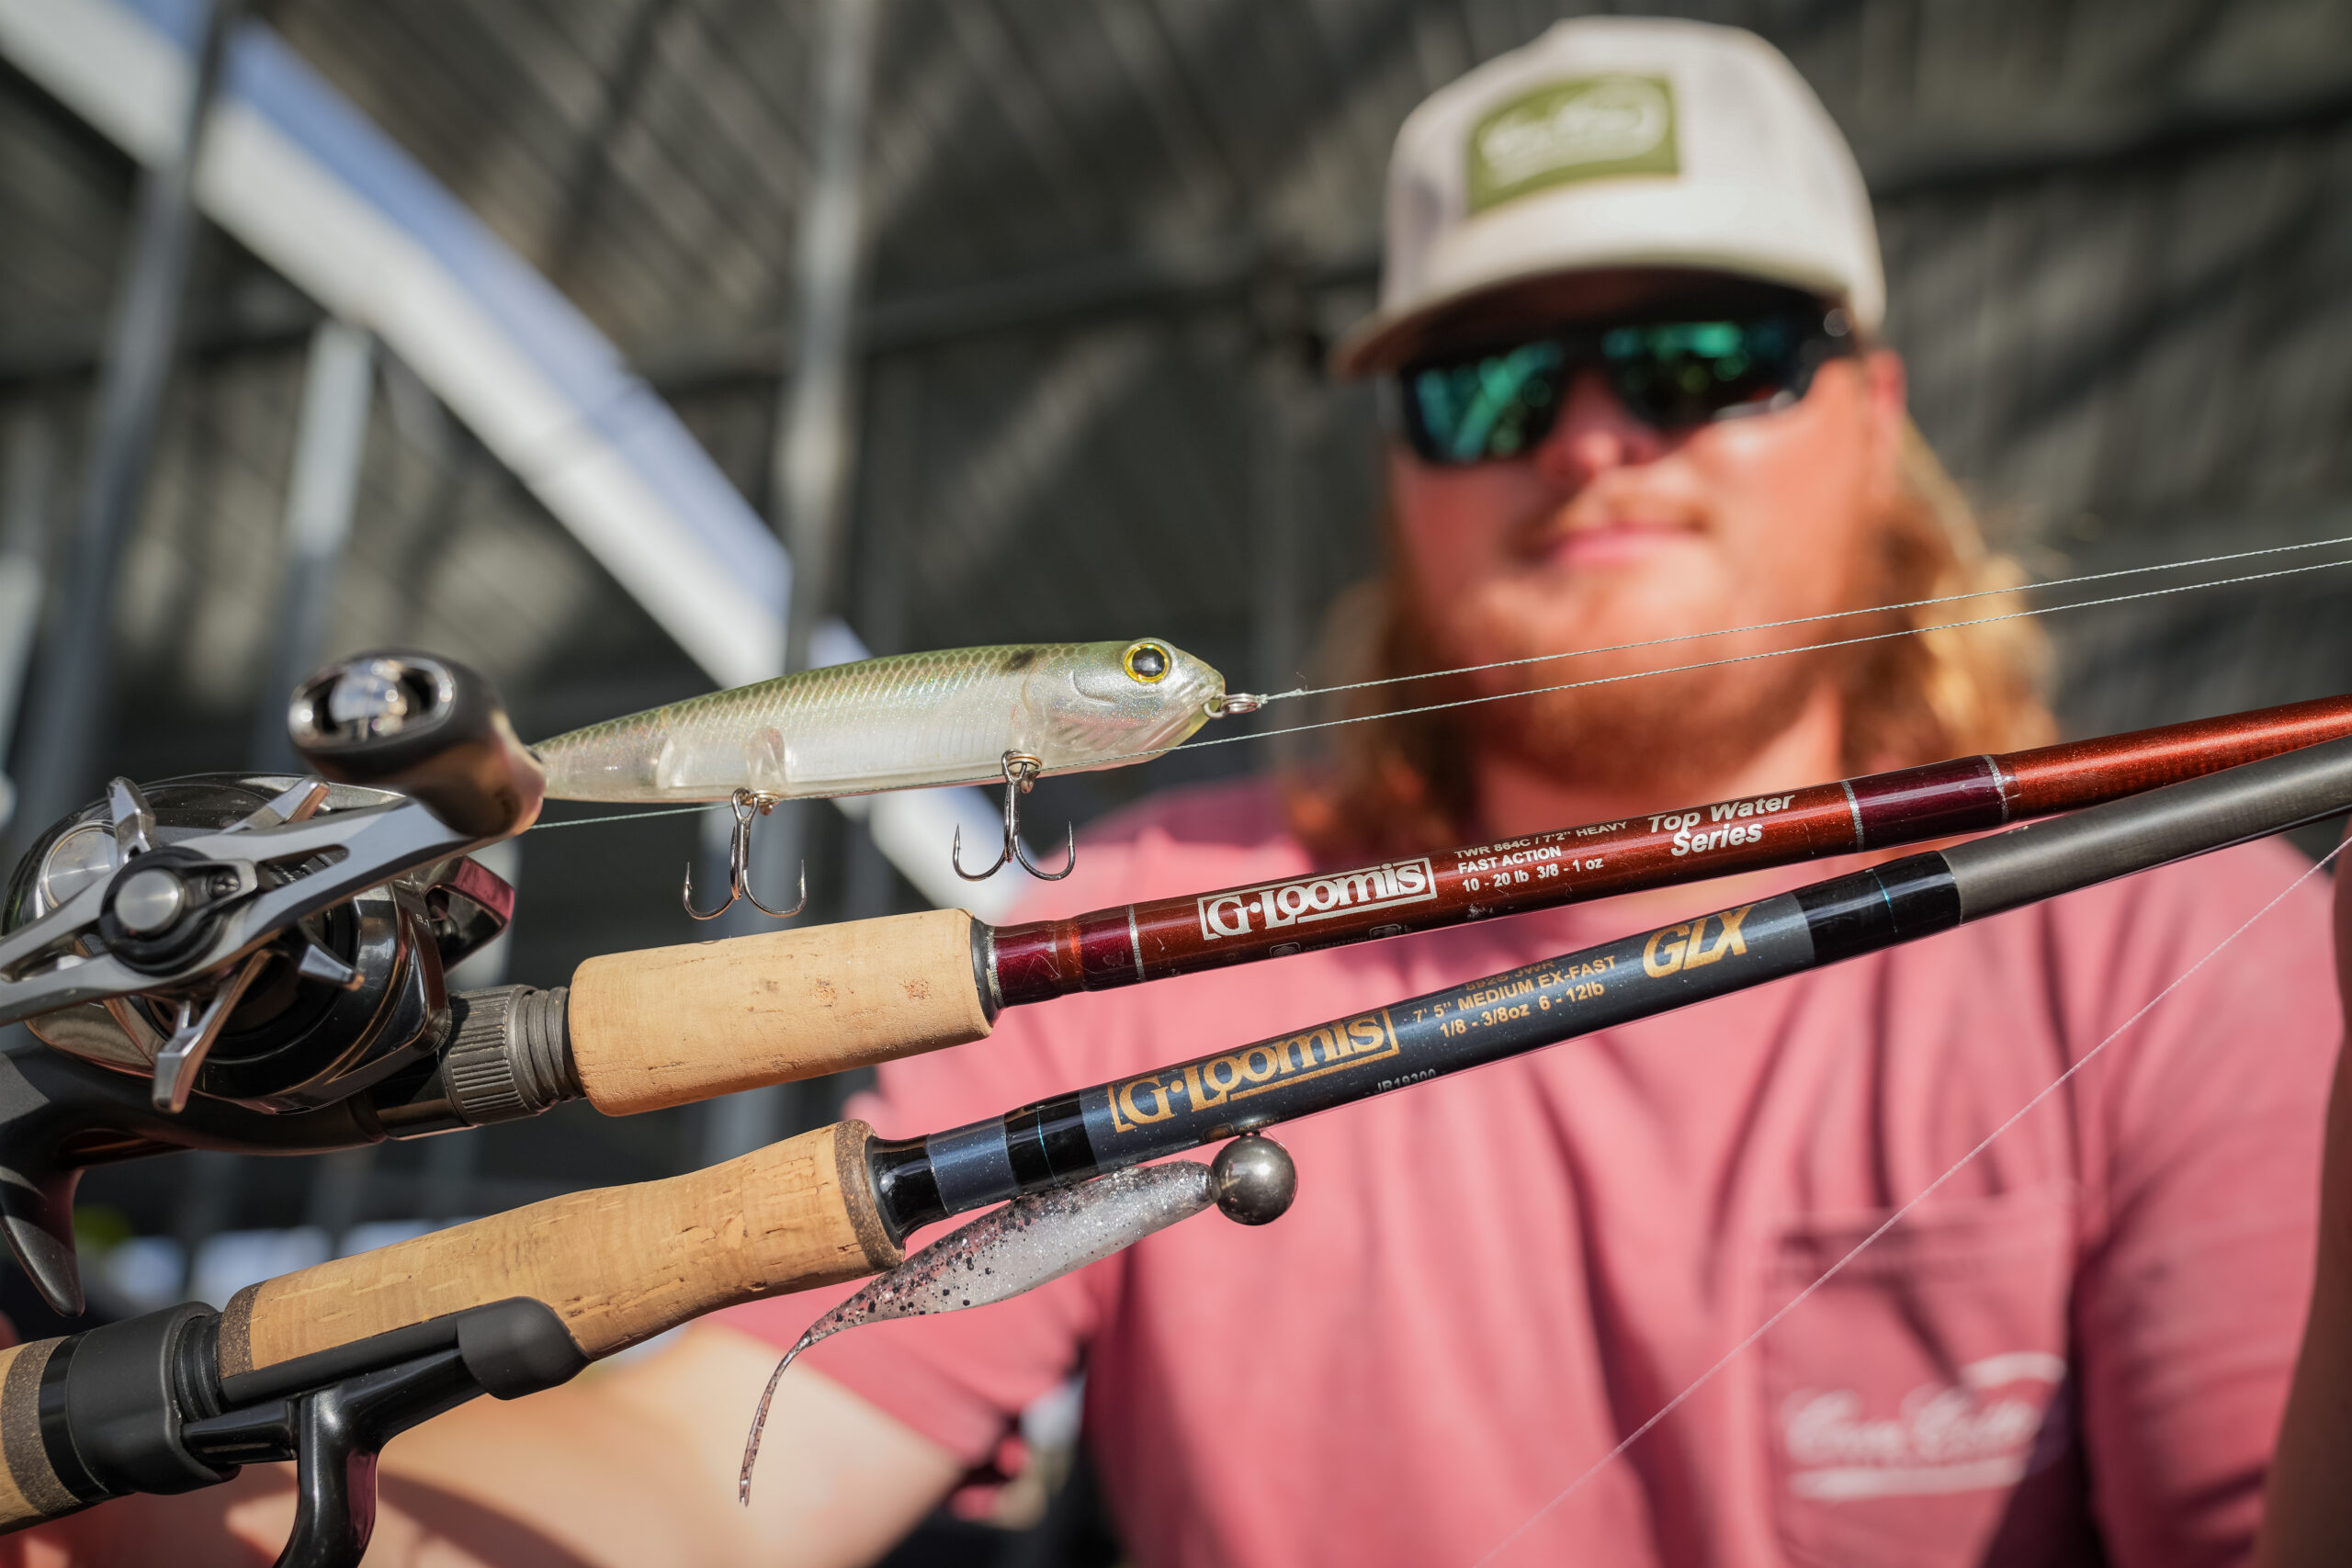 Top 10 baits and patterns from Table Rock - Major League Fishing